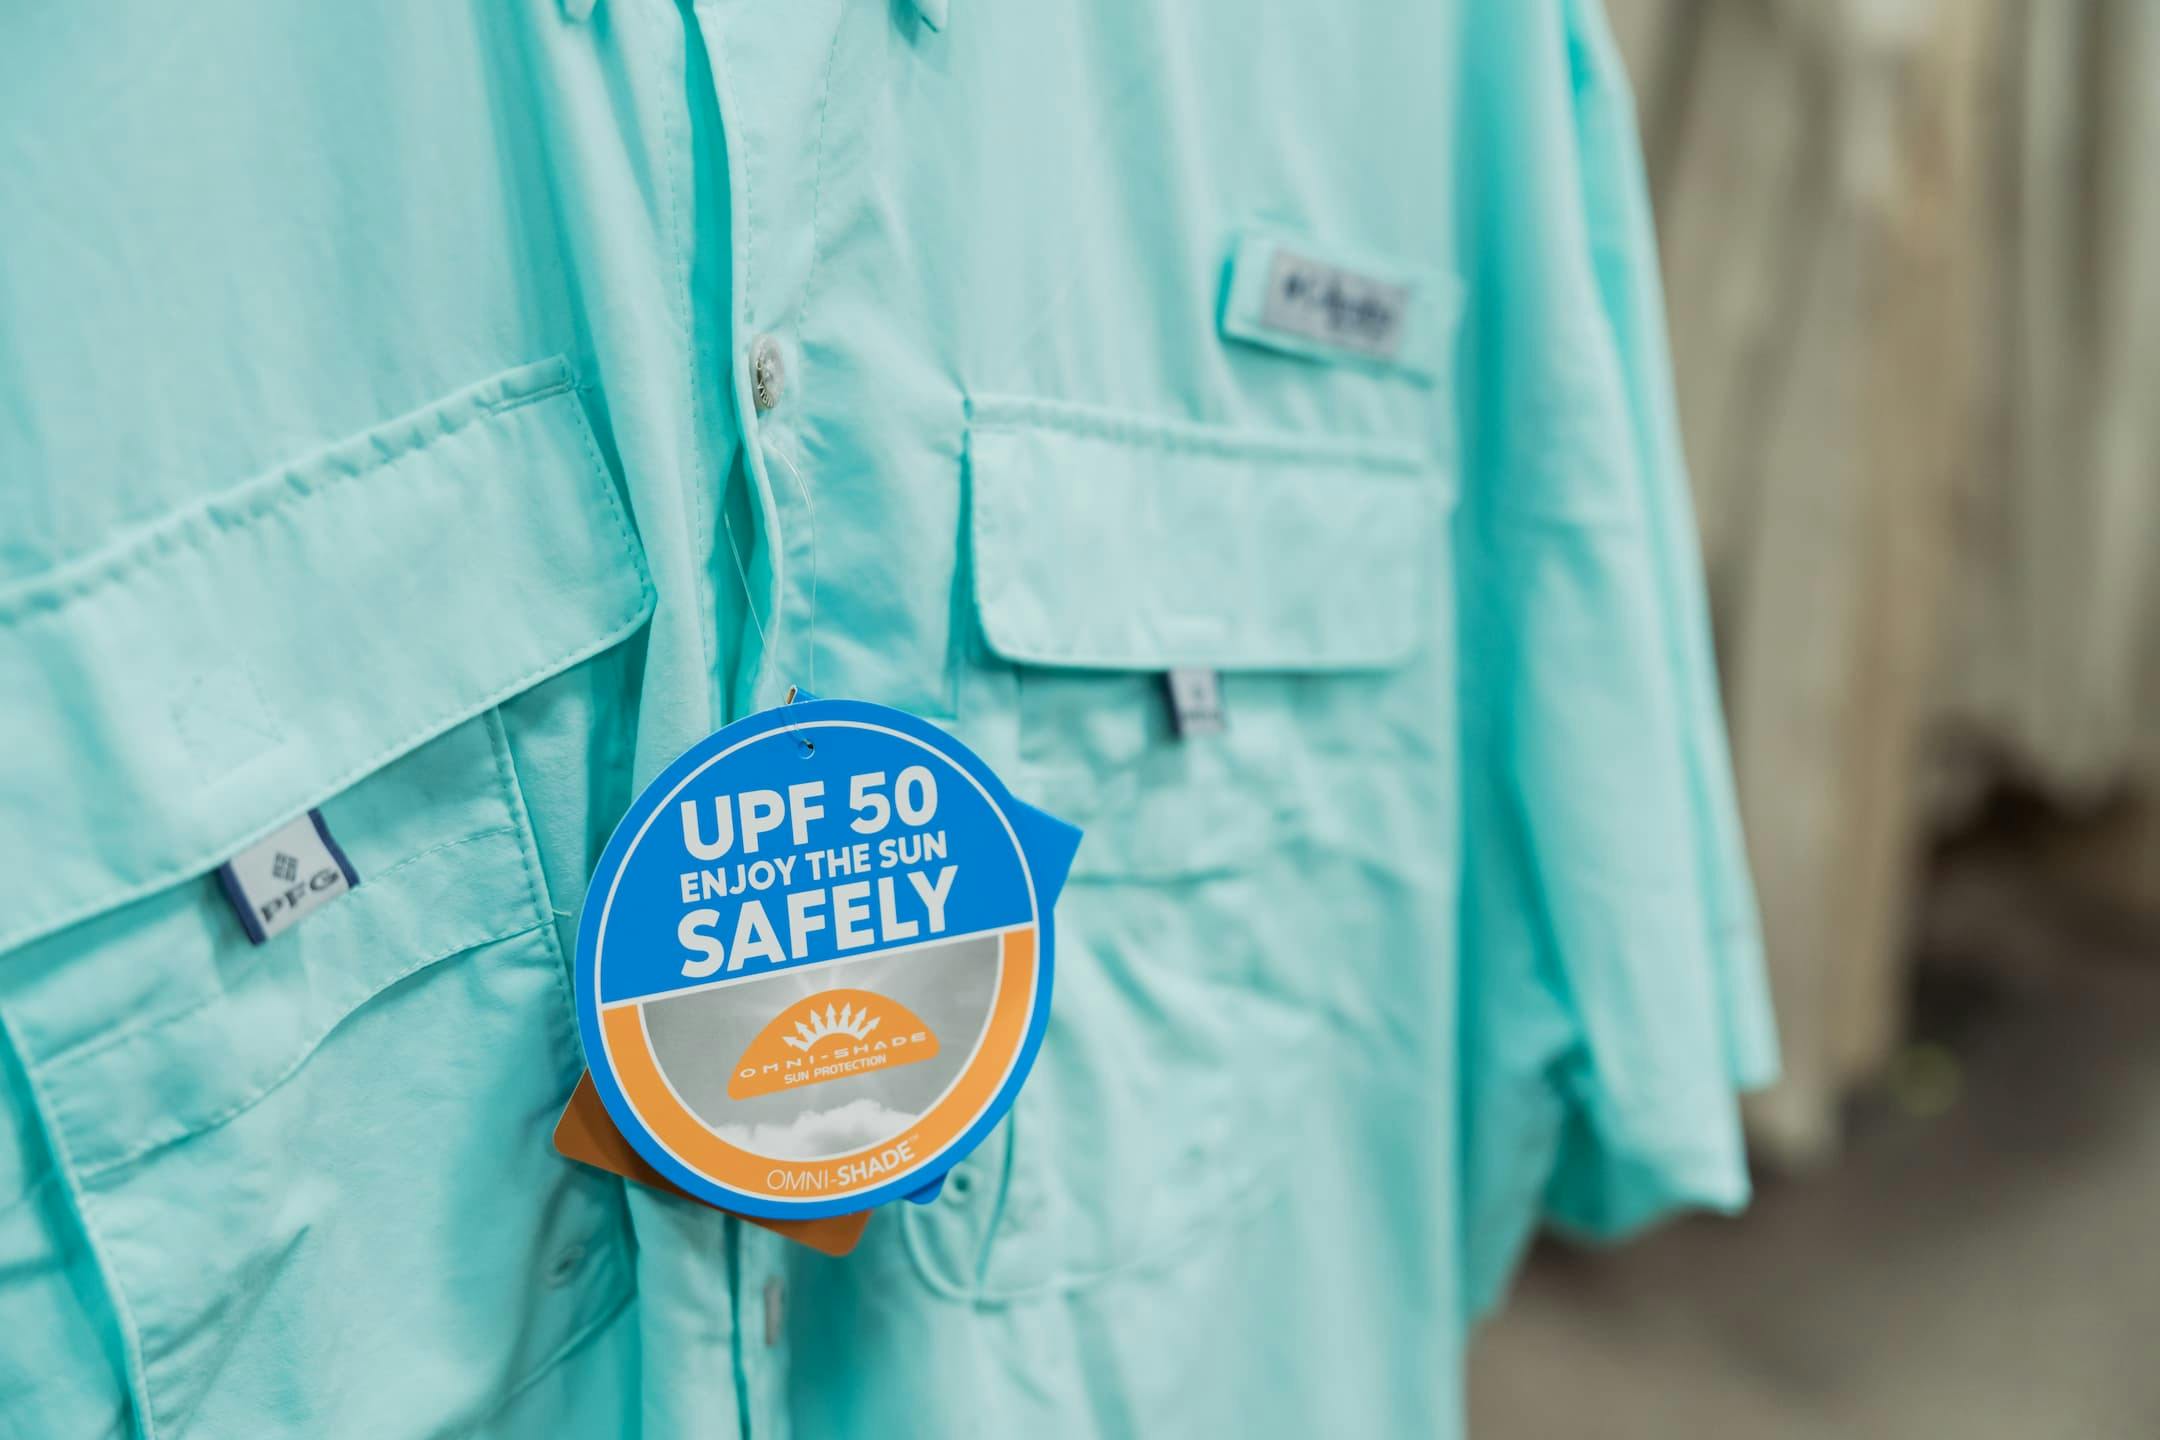 teal blue columbia pfg shirt. image focused on tag that reads "UPF 50 Enjoy the Sun Safely"